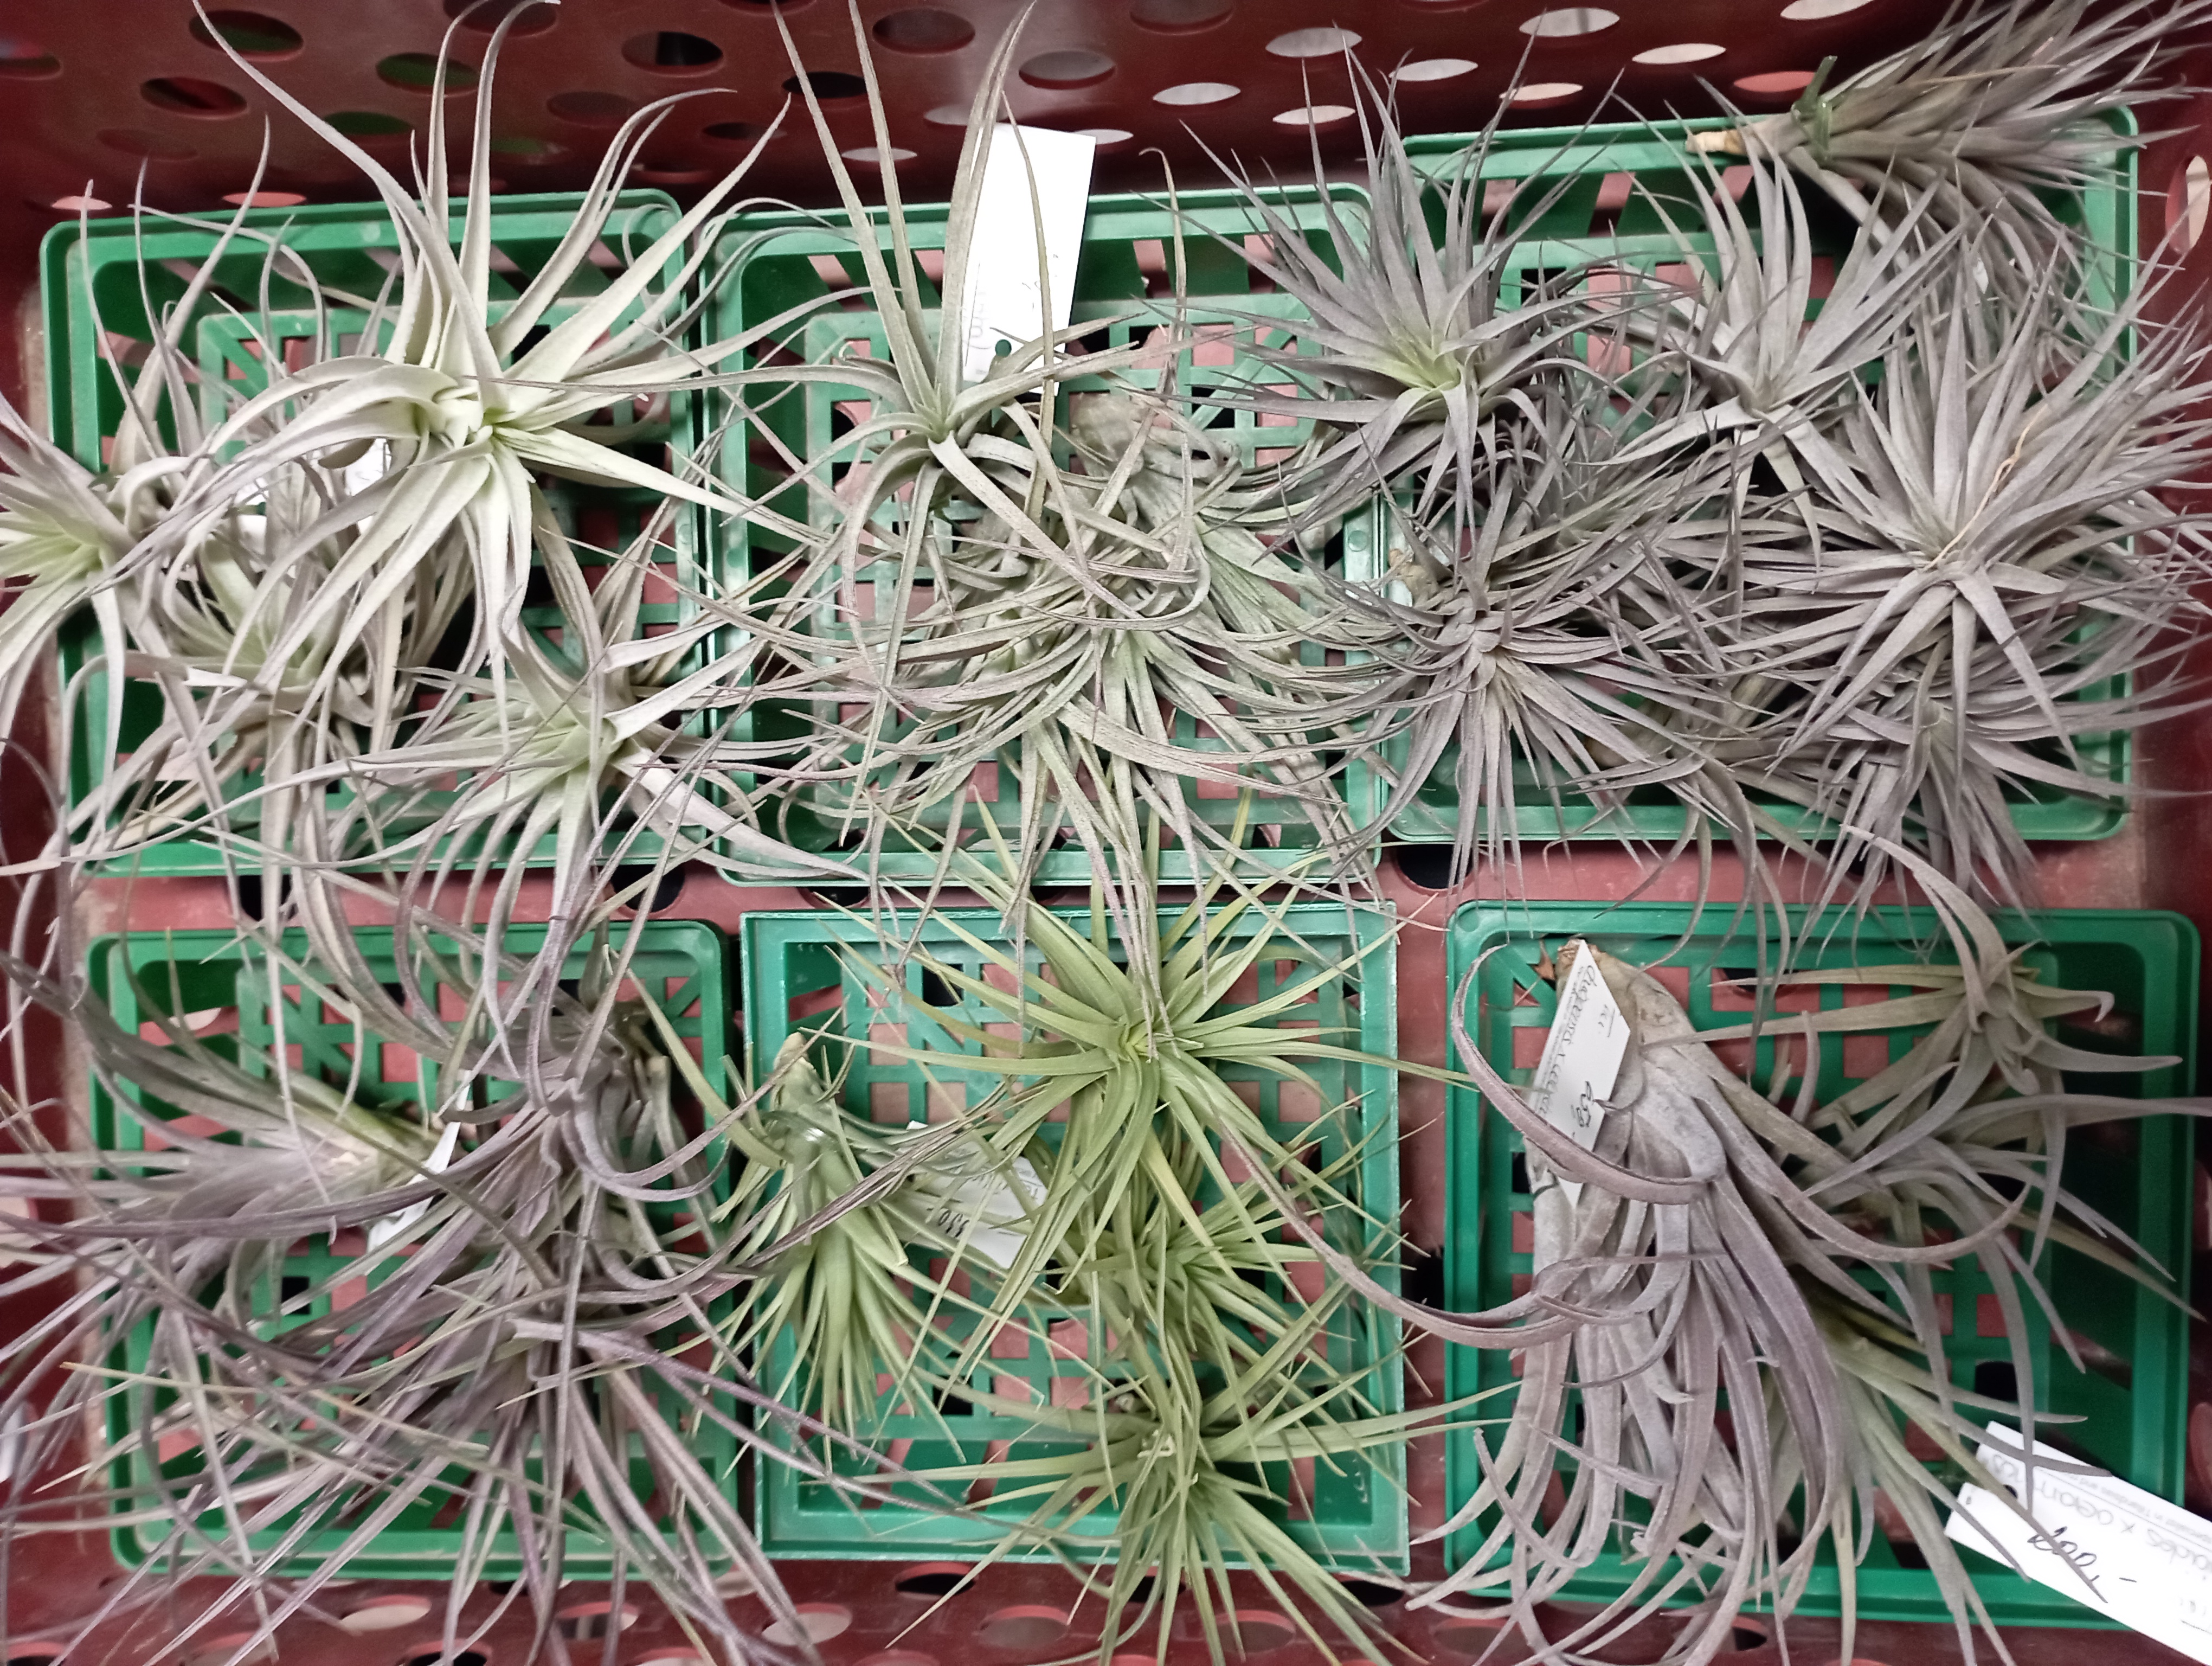 Offer of Tillandsias, imported from Guatemala.